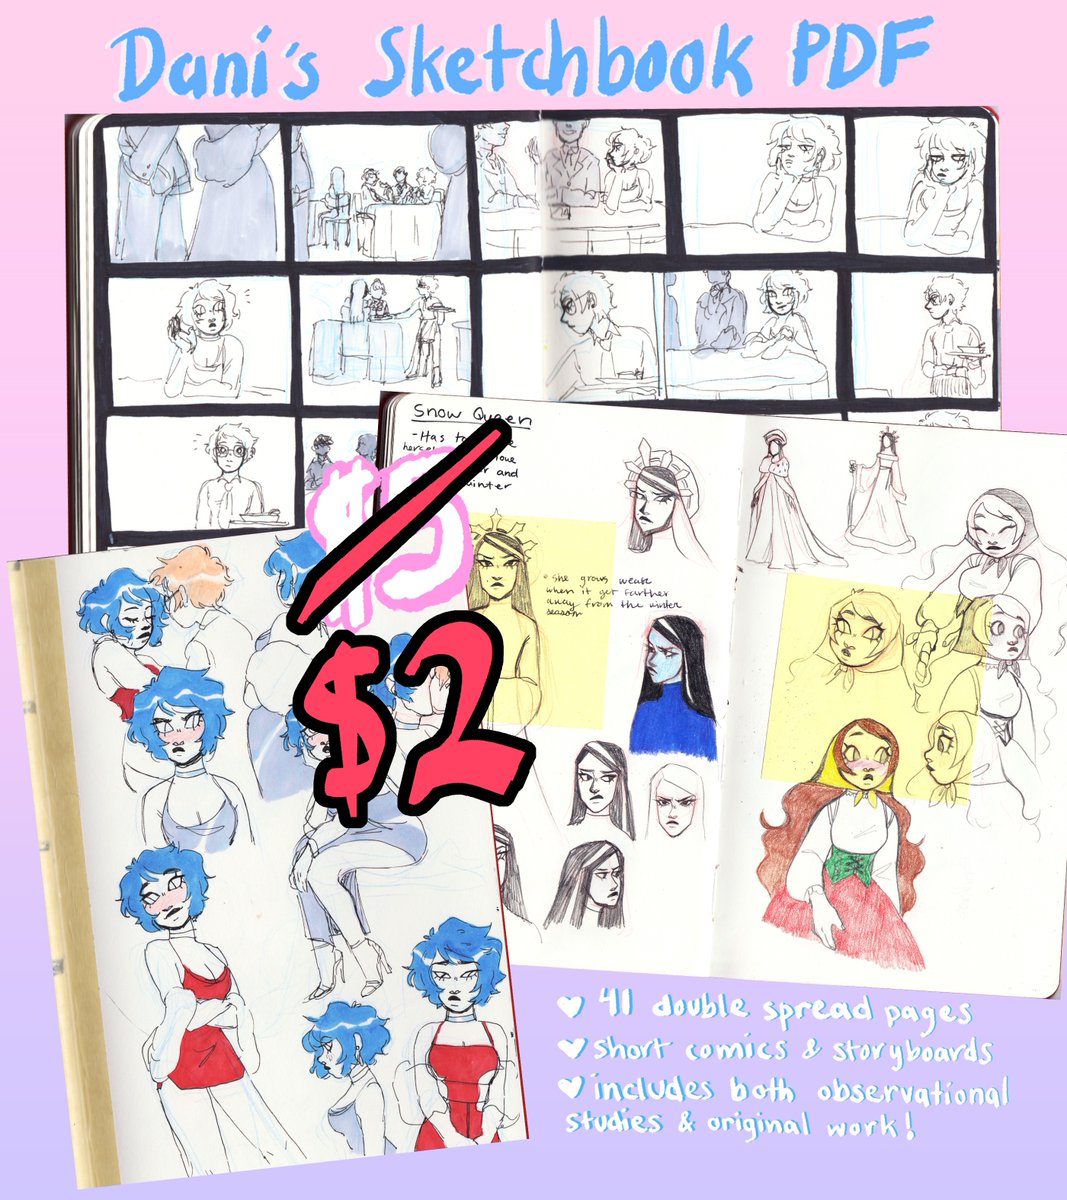 HII~ I reduced the price of my sketchbook pdf to $2! It's  41 pages of (mostly) unpublished OC stories, single page comics and storyboards! Please consider checking it out :3 🍄
⬇️Link below 